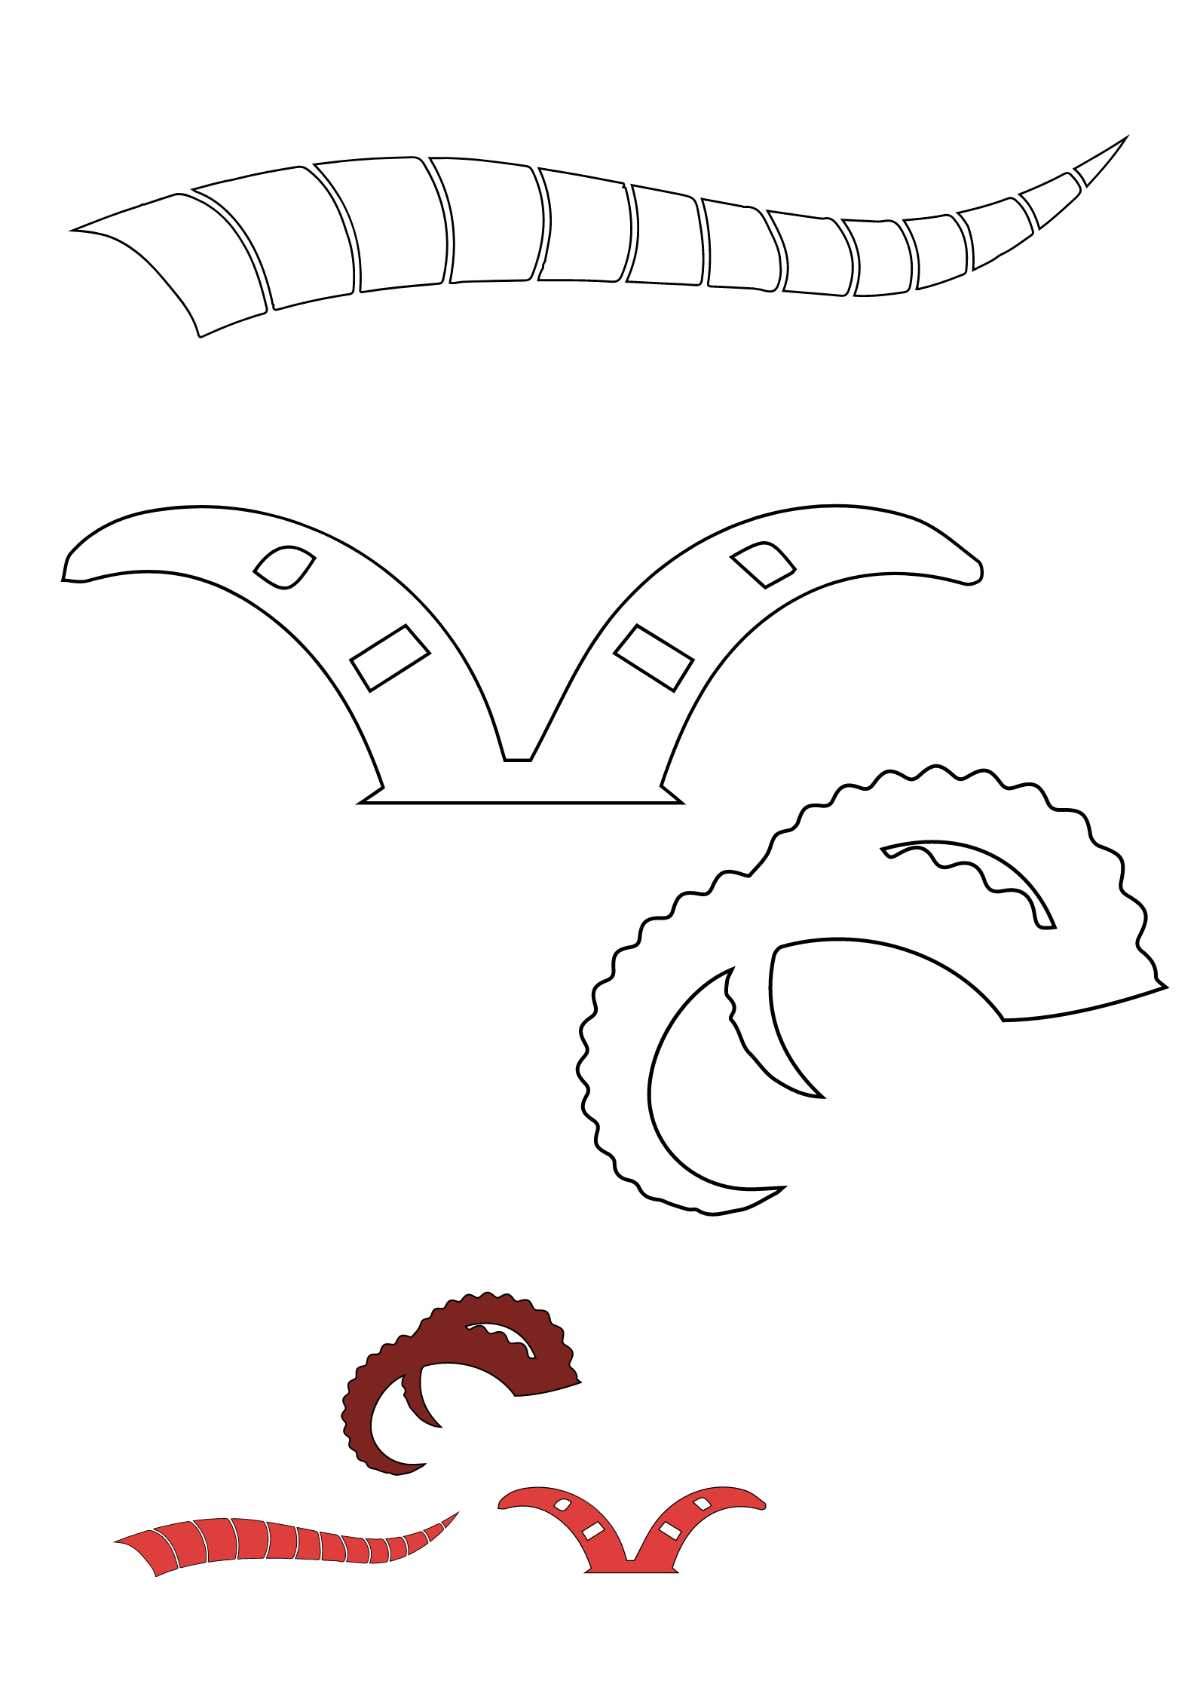 Capricorn Horn coloring page Template